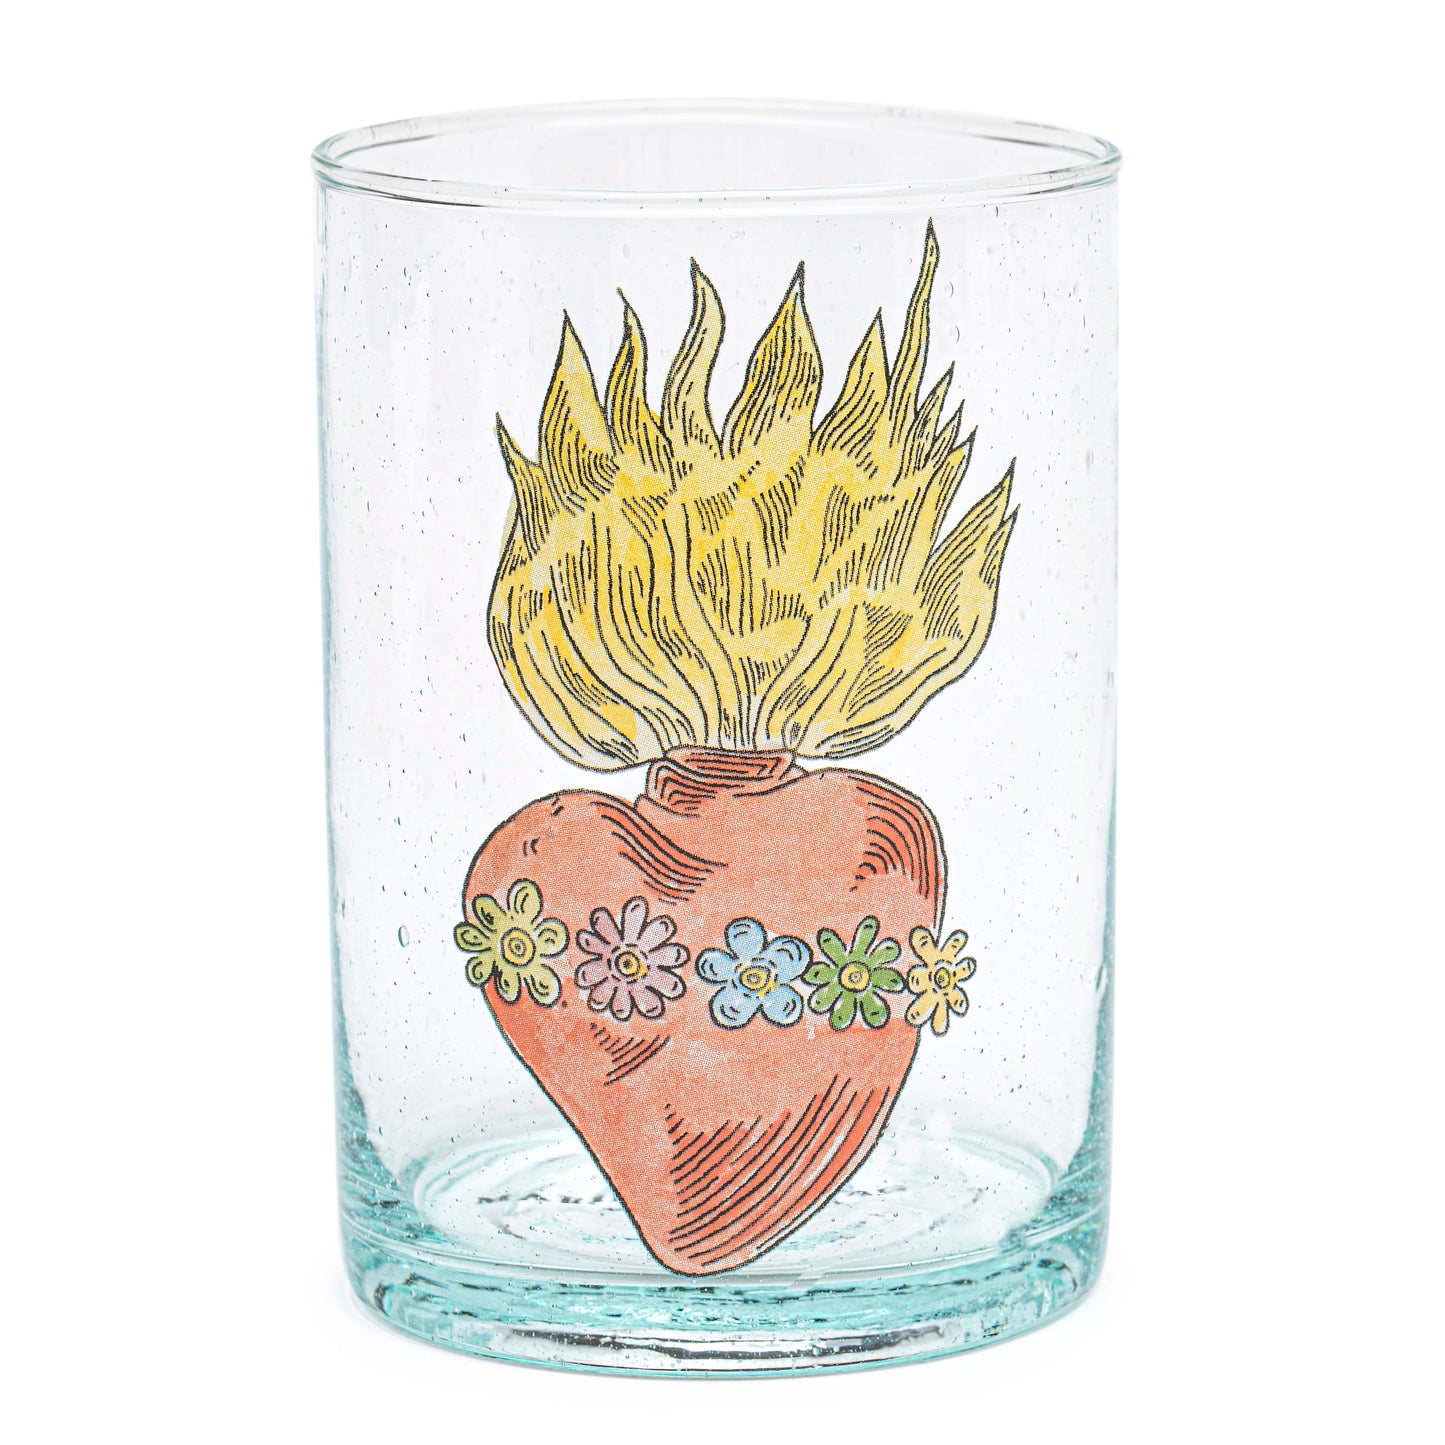 Illustrated glass | SACRED HEART